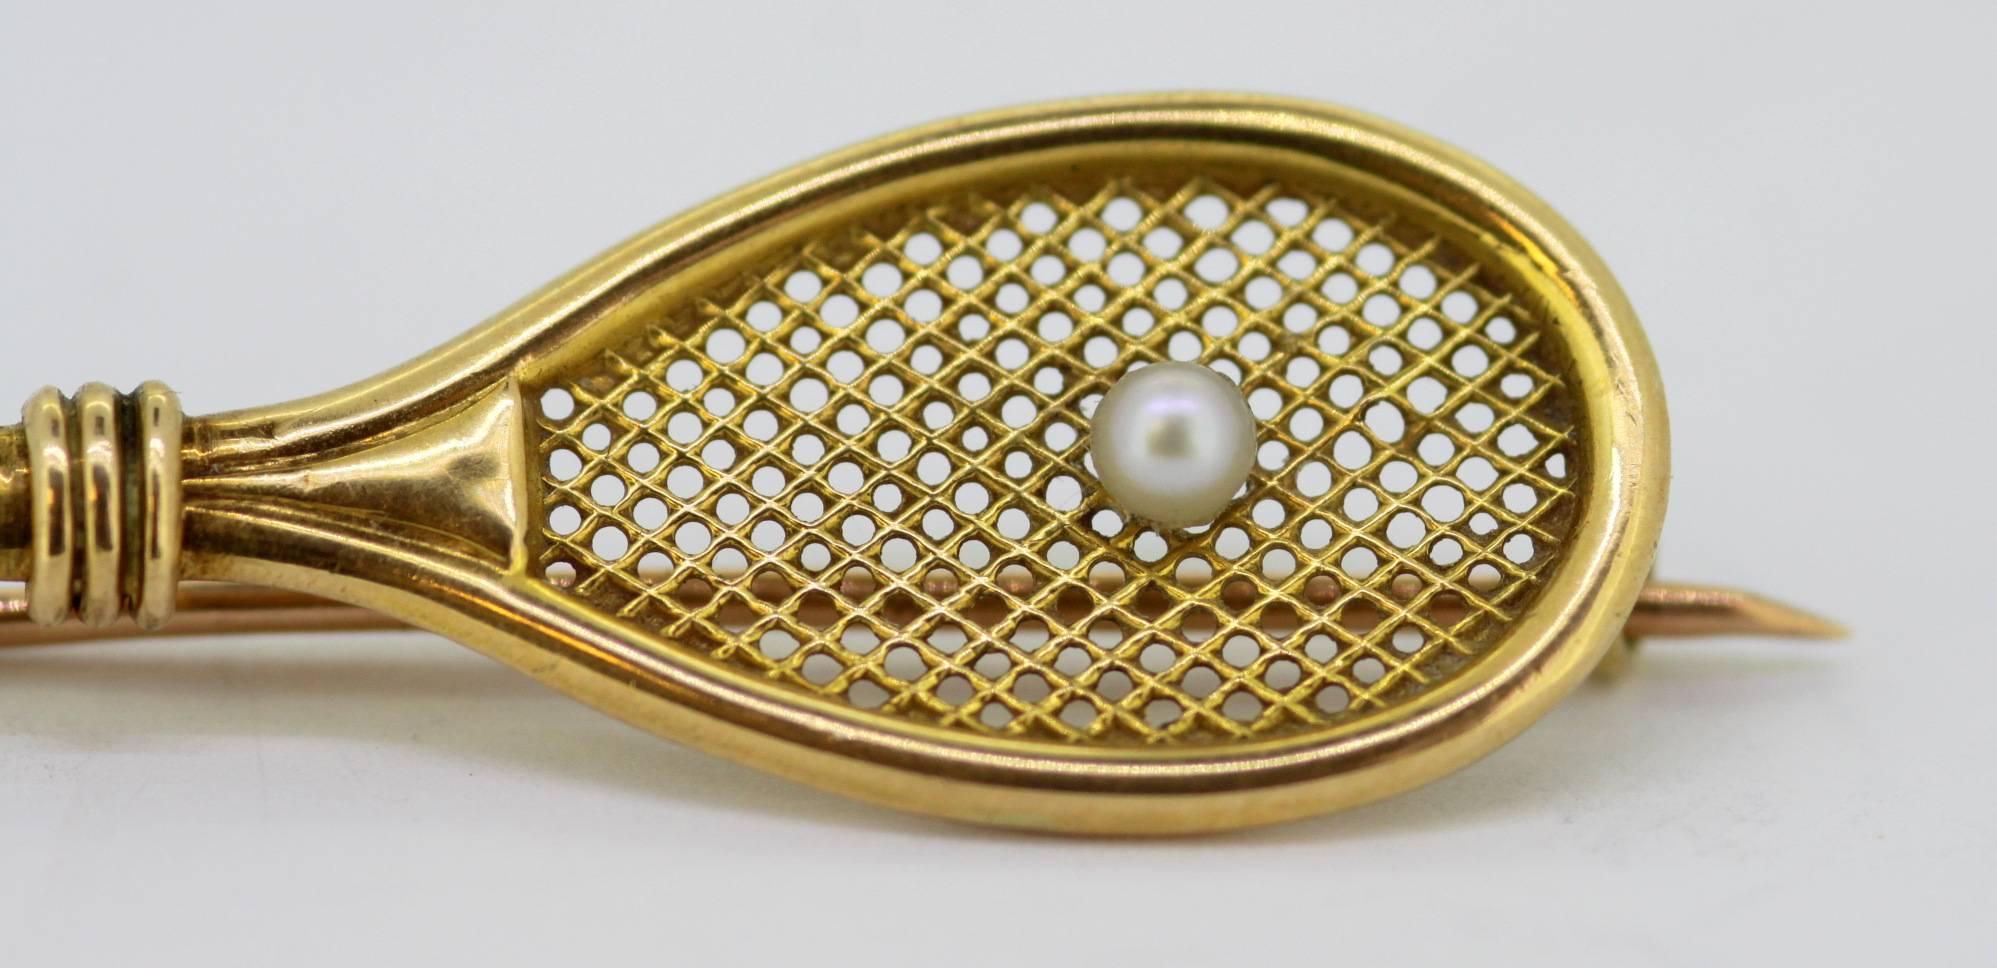 Vintage 18k yellow gold tennis racket brooch with freshwater pearl (0.10 ct) 
c.1980's
Fully hallmarked.

Approx Dimensions - 
Size : 5.3 x 1.4 x 0.6 cm
Weight : 2 grams

Freshwater Pearl -
Size : 0.10 CT

Condition: Has signs of general usage, no